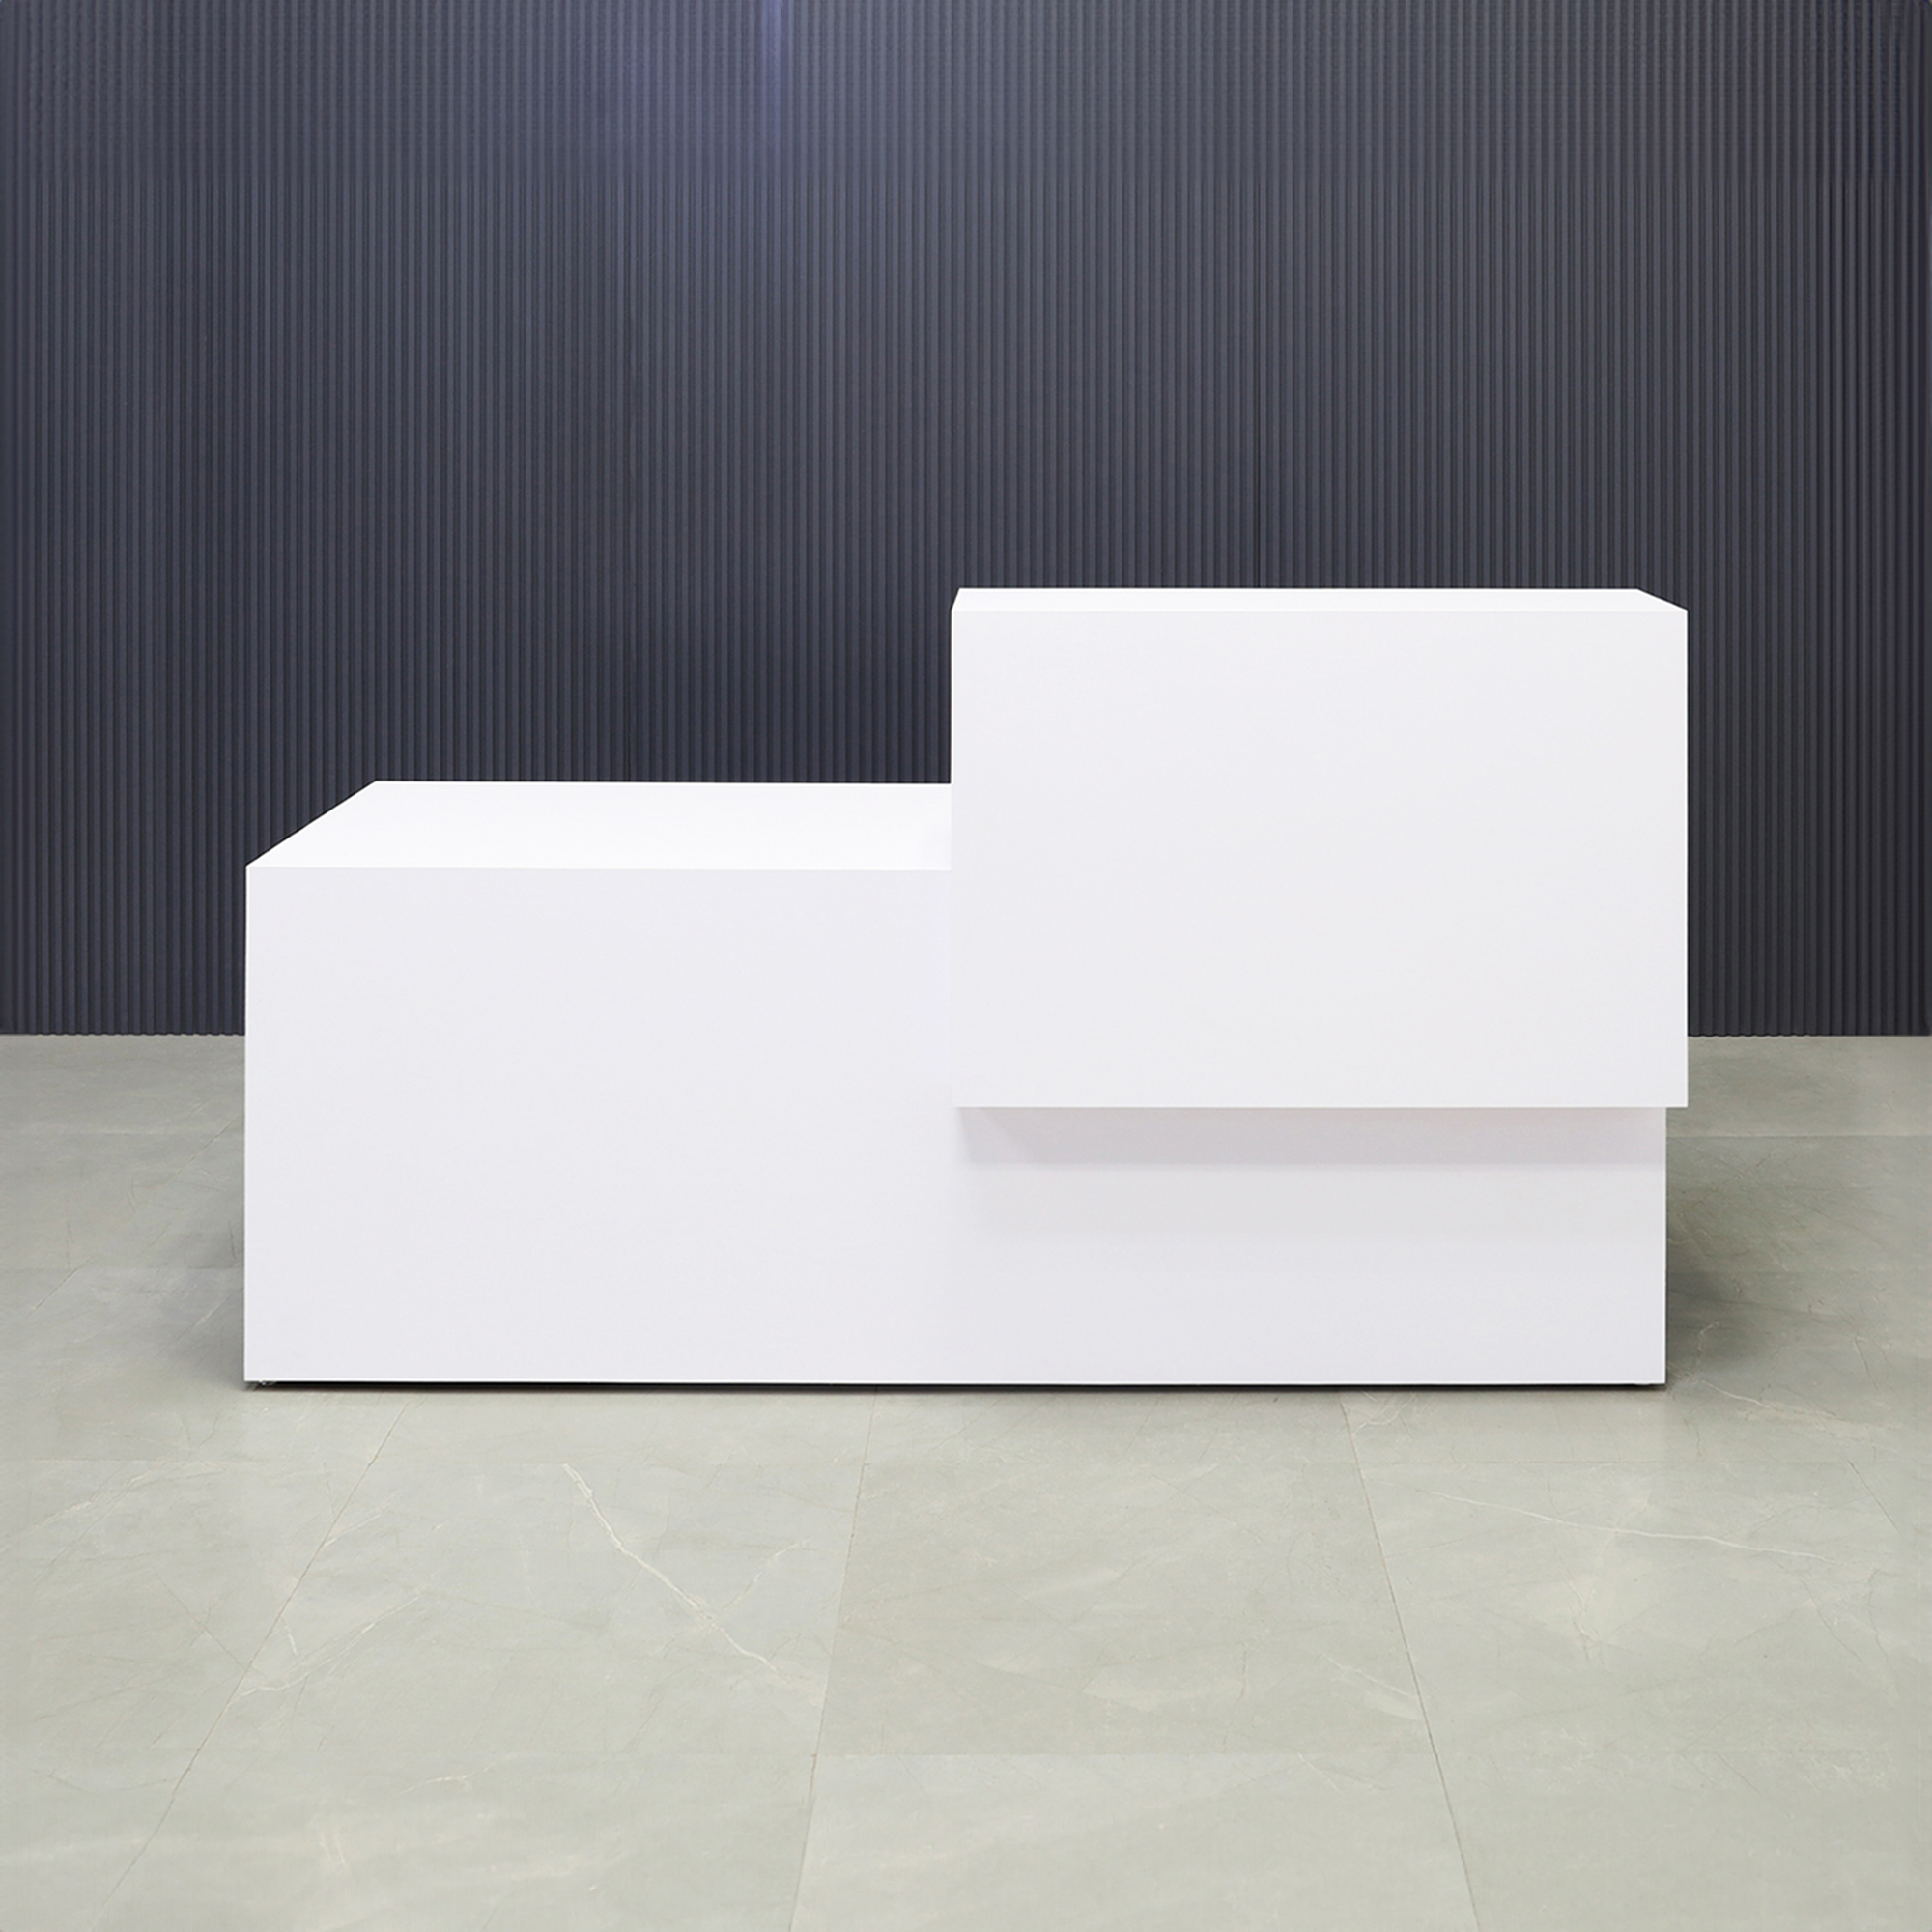 84-inch Los Angeles Reception Desk, right side counter when facing front, in white gloss laminate counter and desk, shown here.